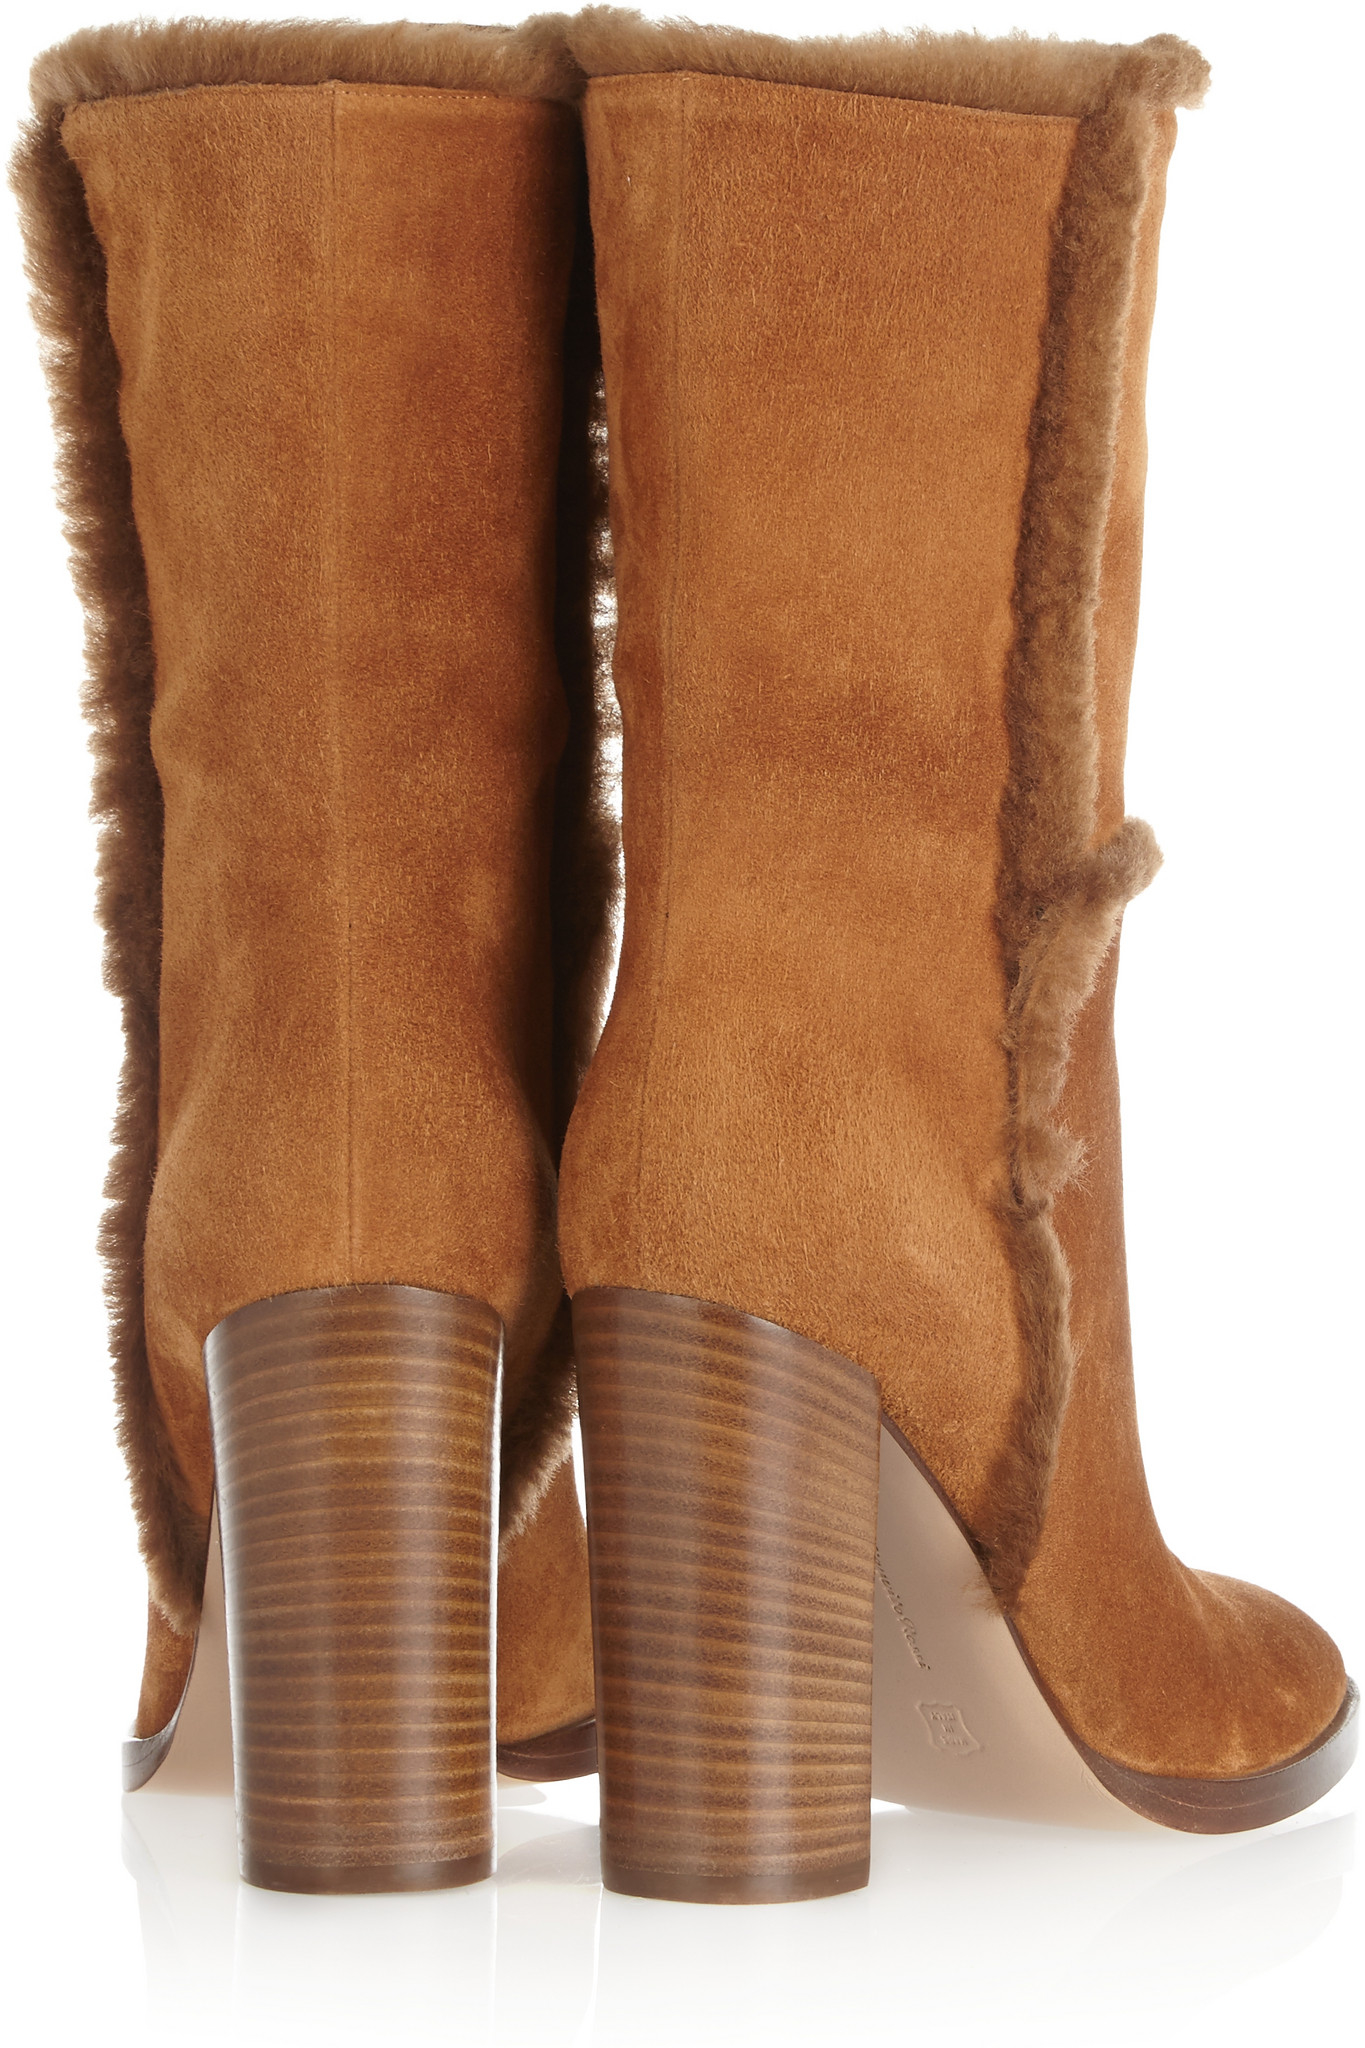 Lyst - Gianvito Rossi Shearling-Trimmed Suede Ankle Boots in Brown